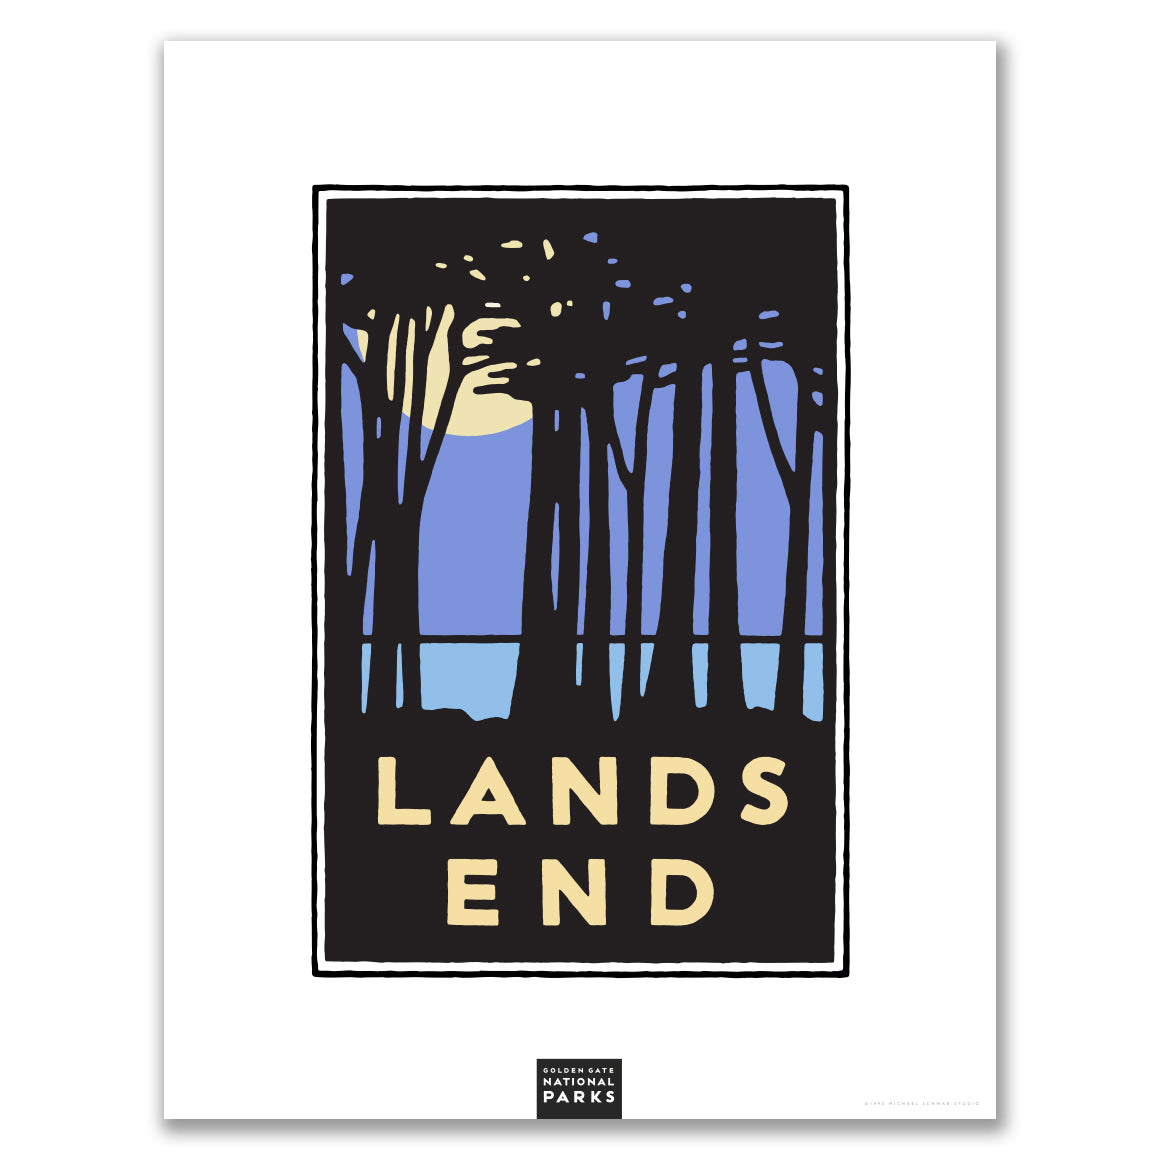 Multicolor Lands End giclee poster print, with art by Michael Schwab